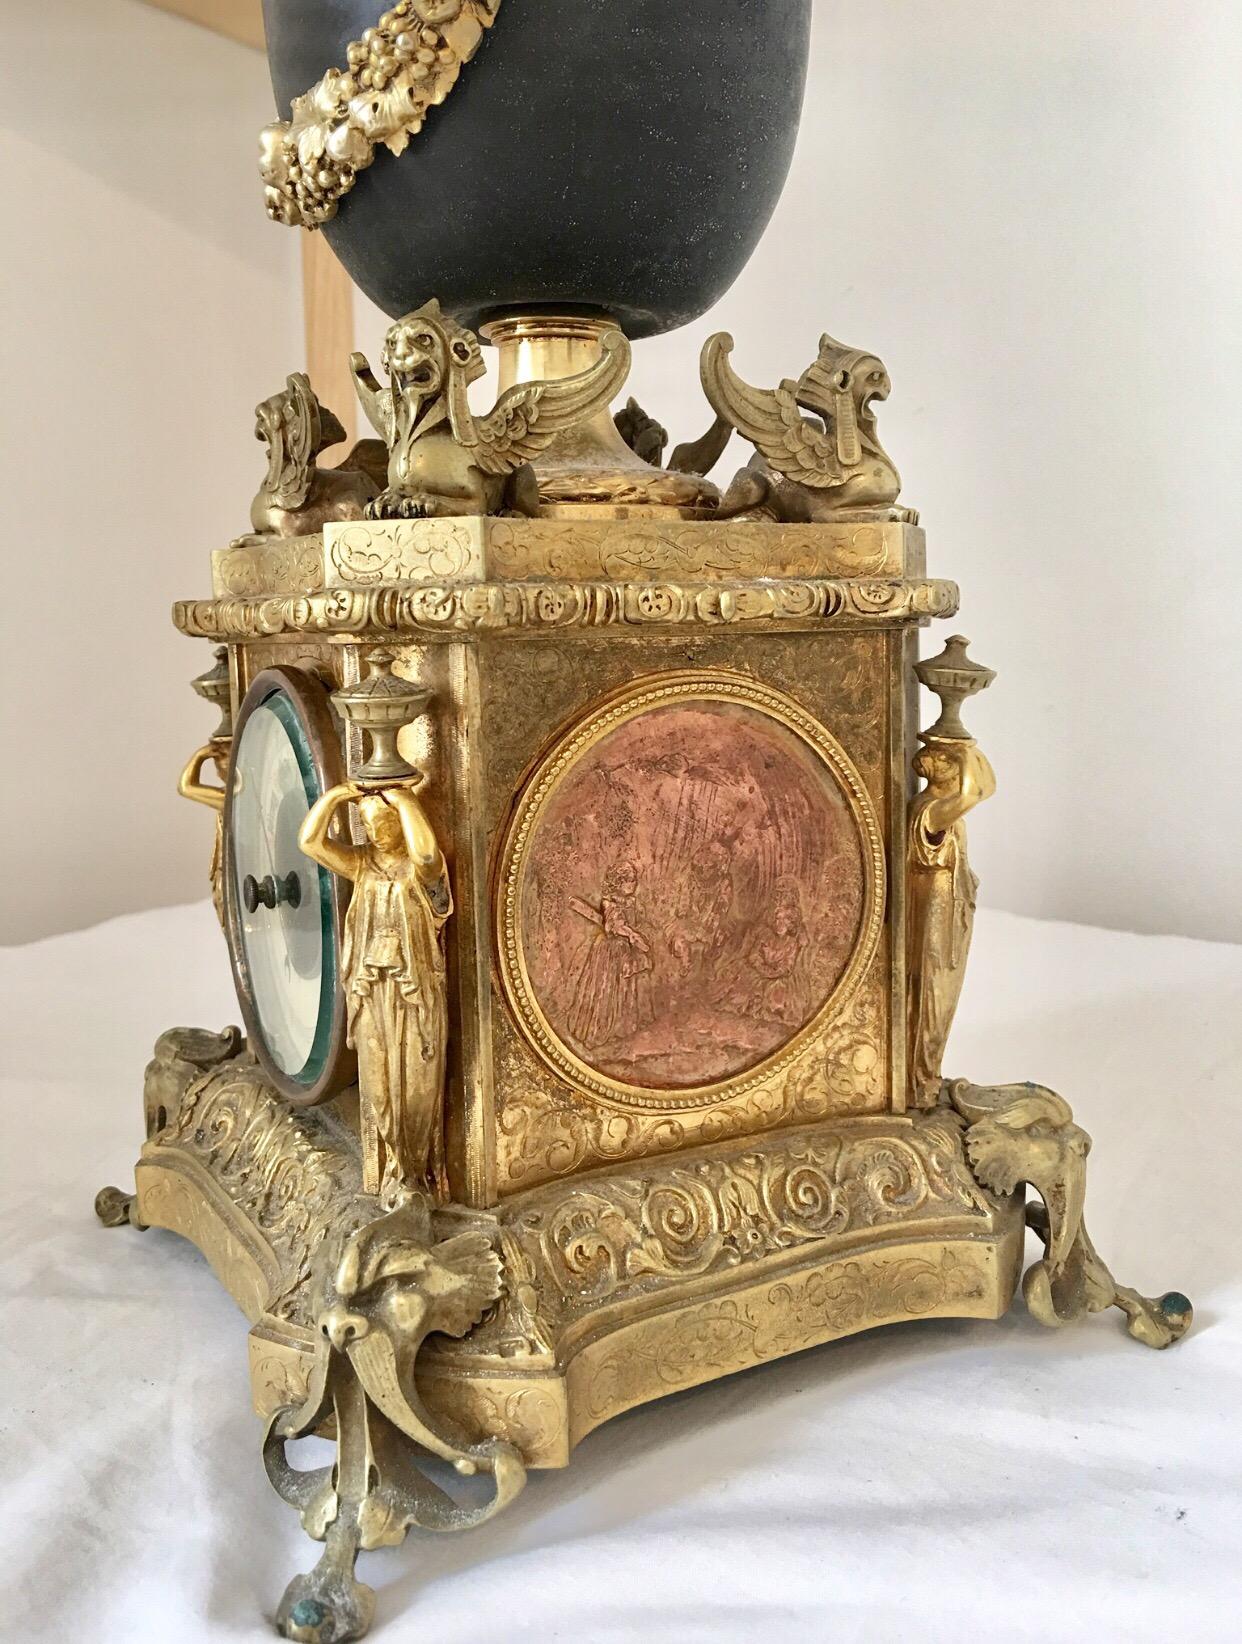 Gilt Antique French Annular Dial Striking Urn Clock and Barometer, circa 1880